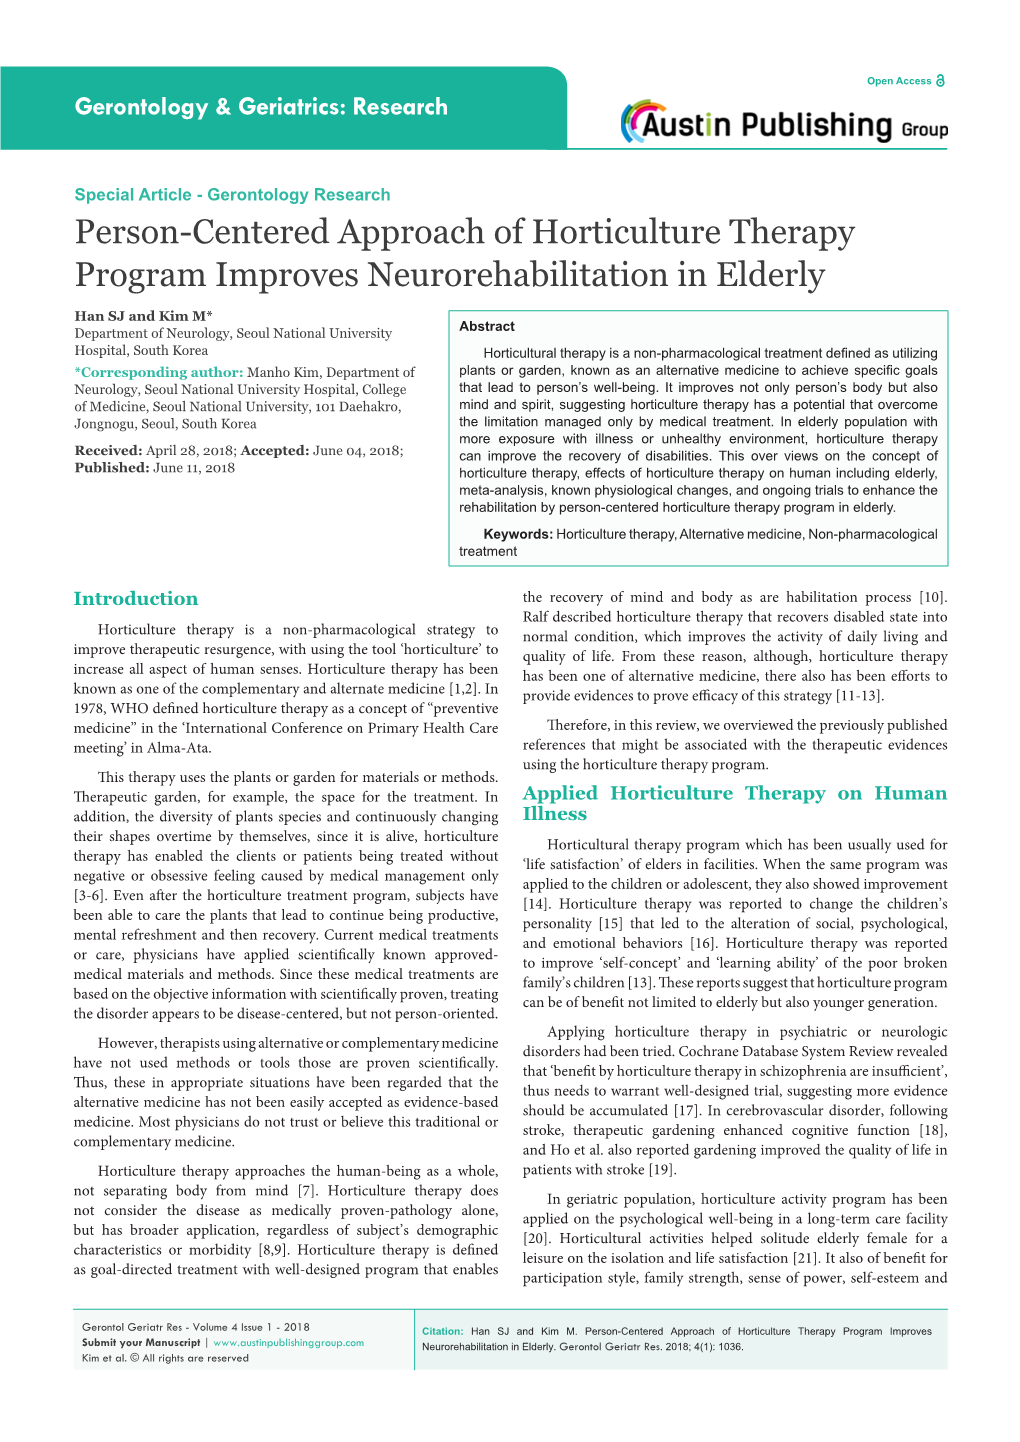 Person-Centered Approach of Horticulture Therapy Program Improves Neurorehabilitation in Elderly